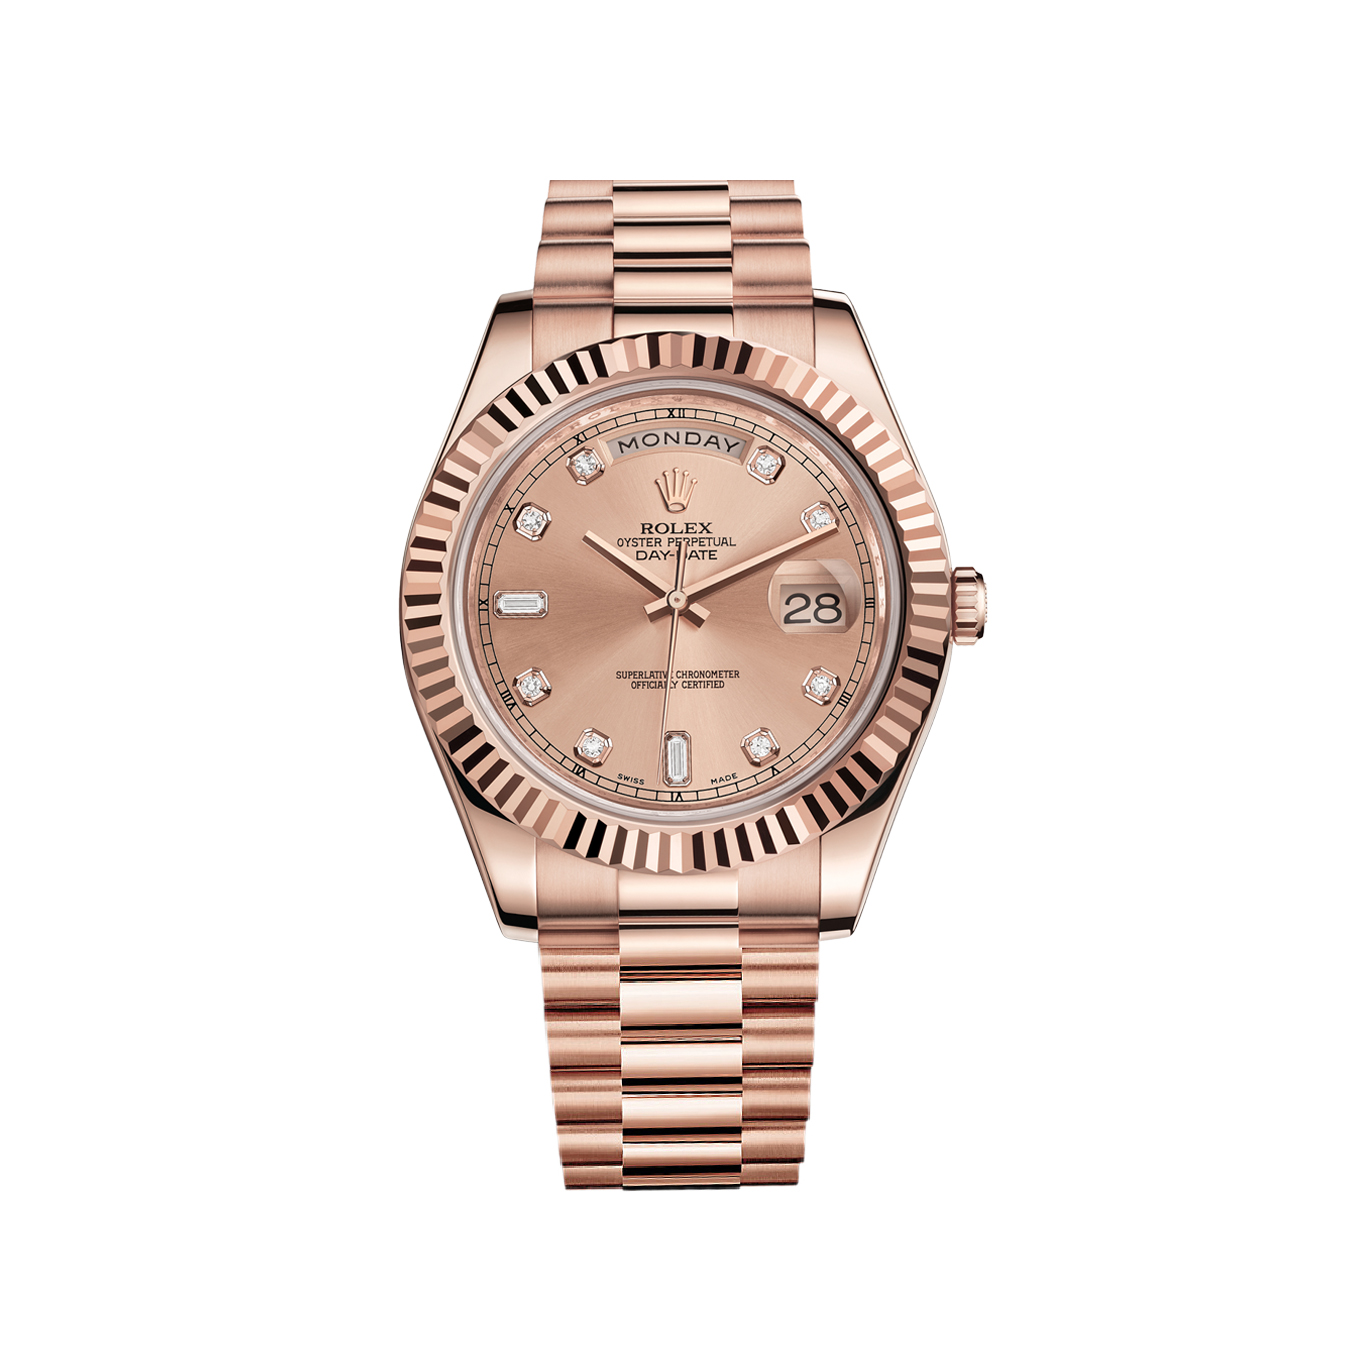 Day-Date II 218235 Rose Gold Watch (Pink Set with Diamonds)